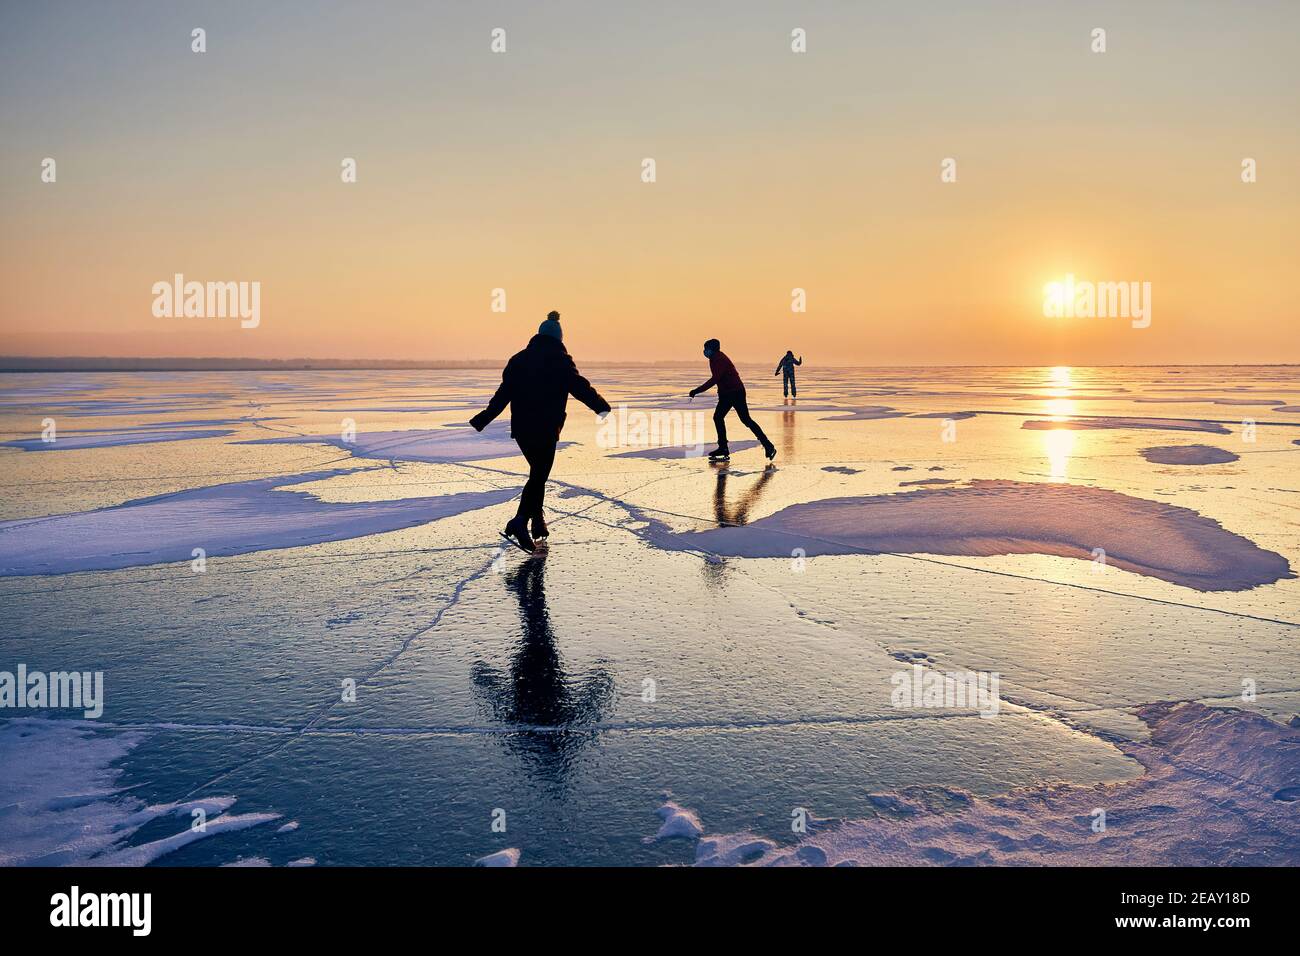 People are ice skating in silhouette at frozen lake against beautiful orange sunrise Stock Photo